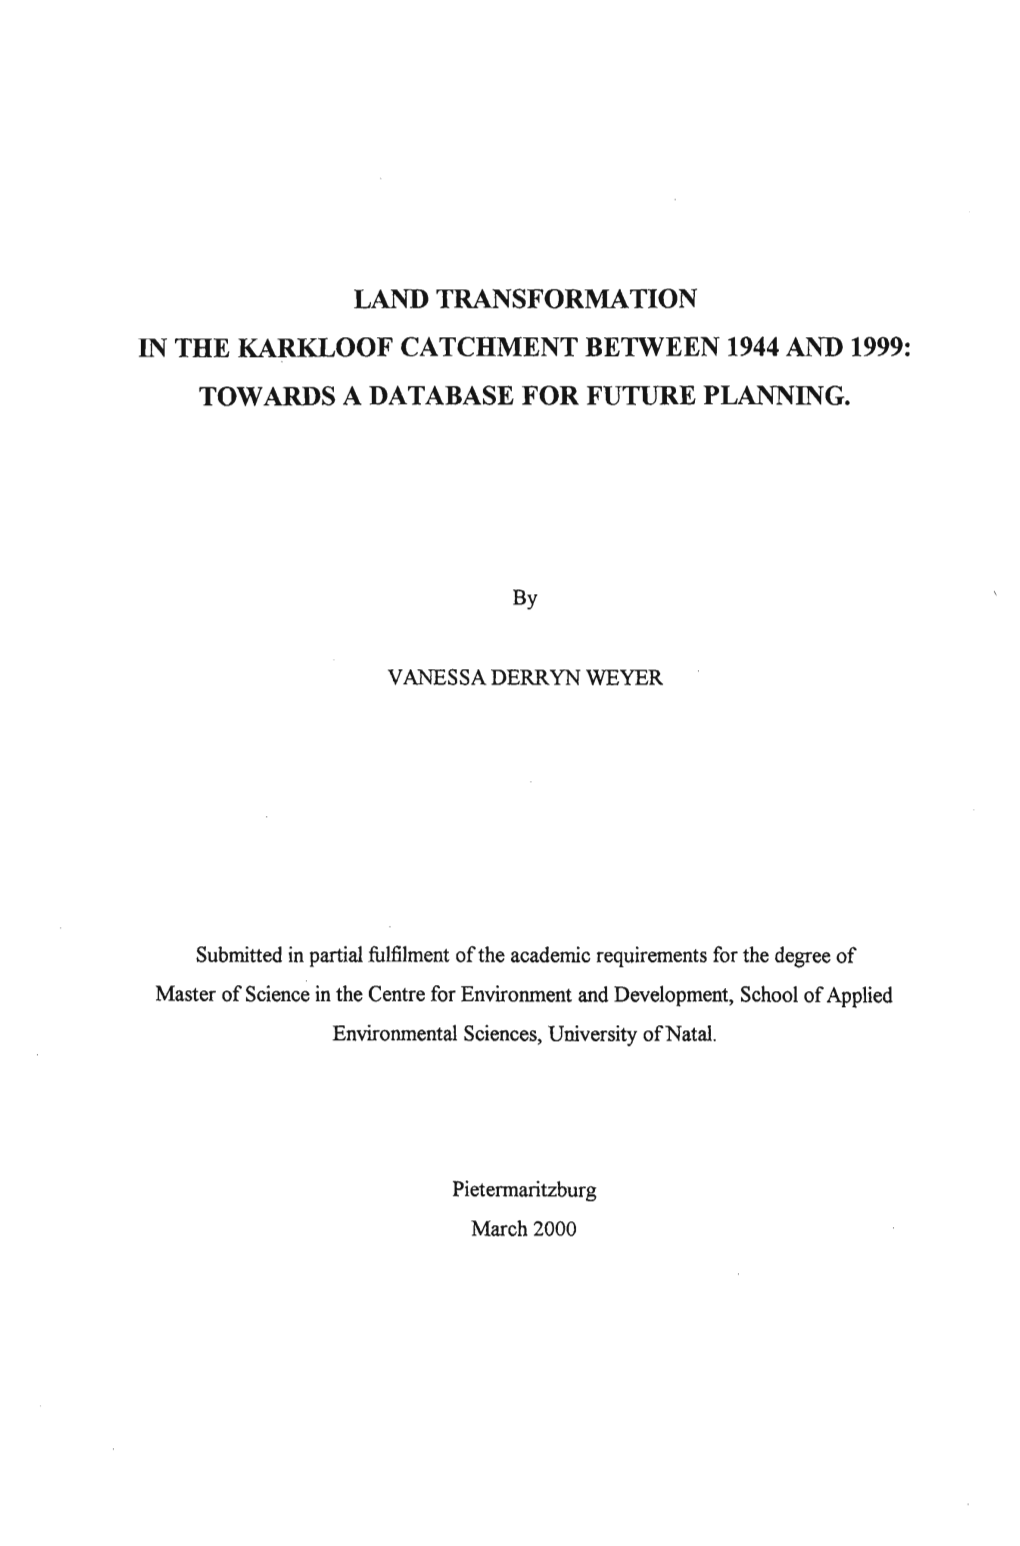 Land Transformation in the Karkloof Catchment Between 1944 and 1999: Towards a Database for Future Planning